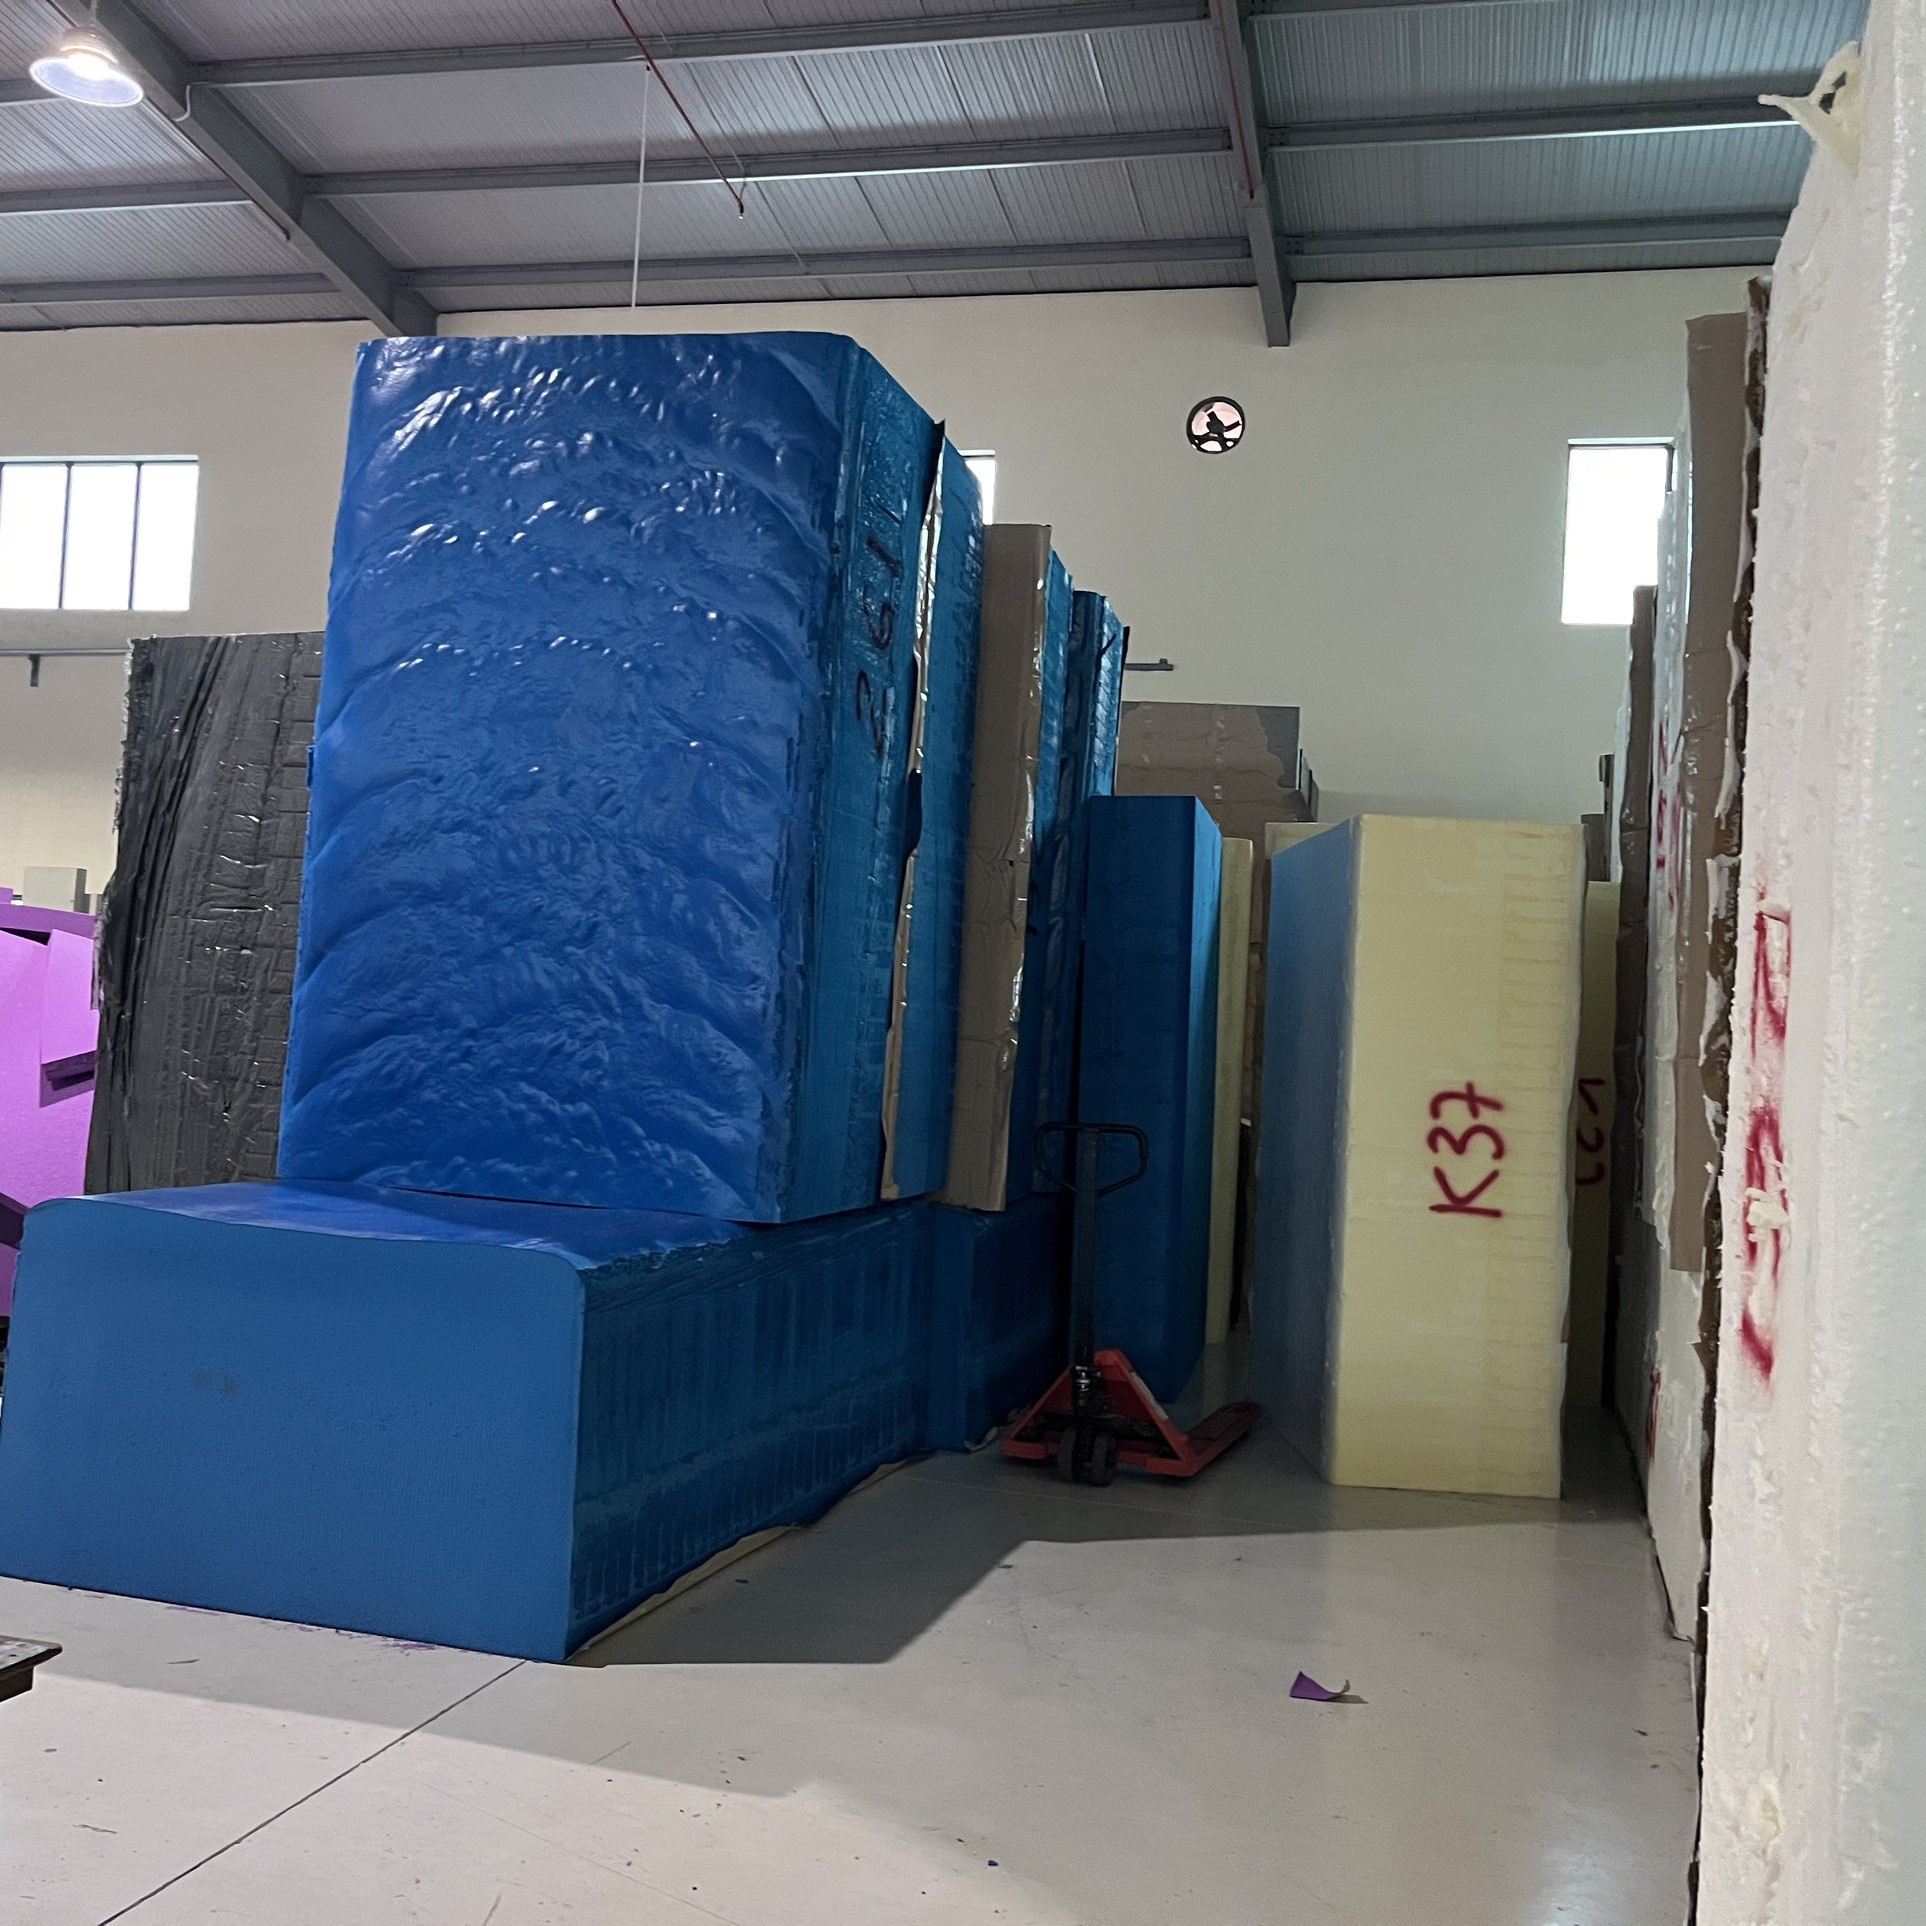 Polyurethane Foam Furniture Fast Delivery Non-Toxic Packaging Industry Resistant Shock Proof Pallets from Vietnam Manufacturer 7